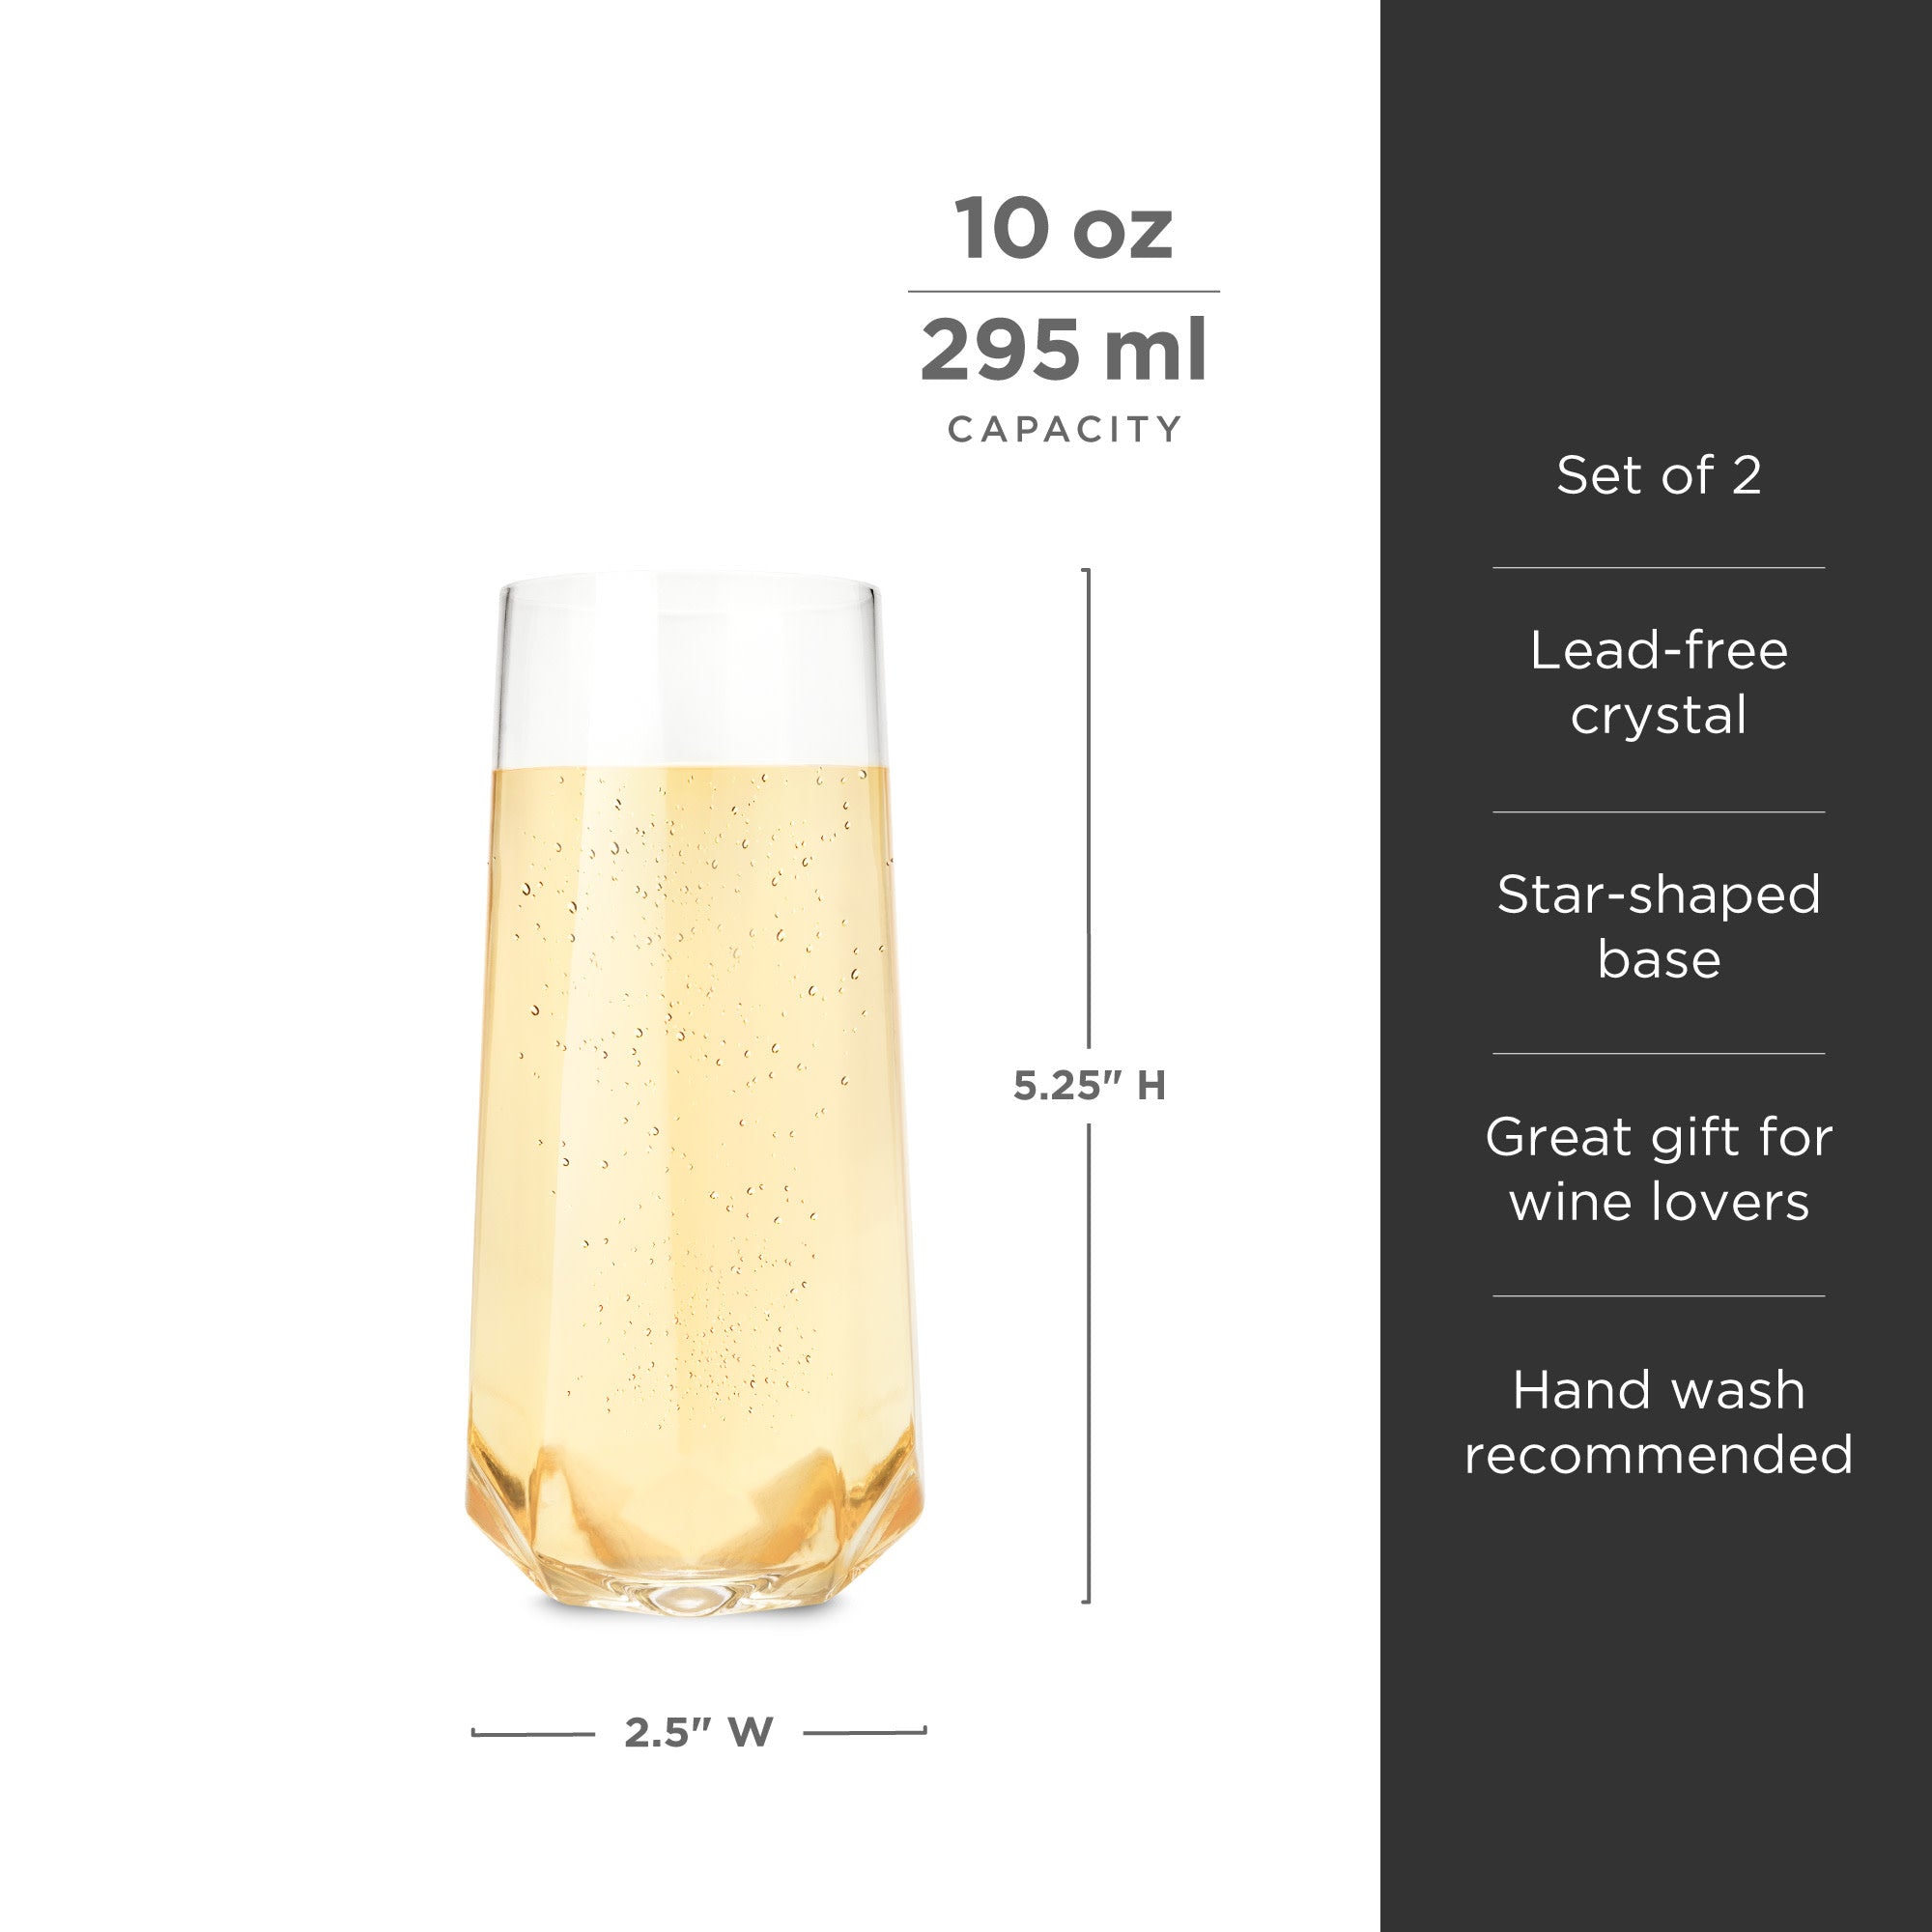 Viski Weighted Stemless Champagne Flutes Glass with Footed Base - Modern  Crystal Flute Glasses - 9.5 Oz Set of 2, Clear